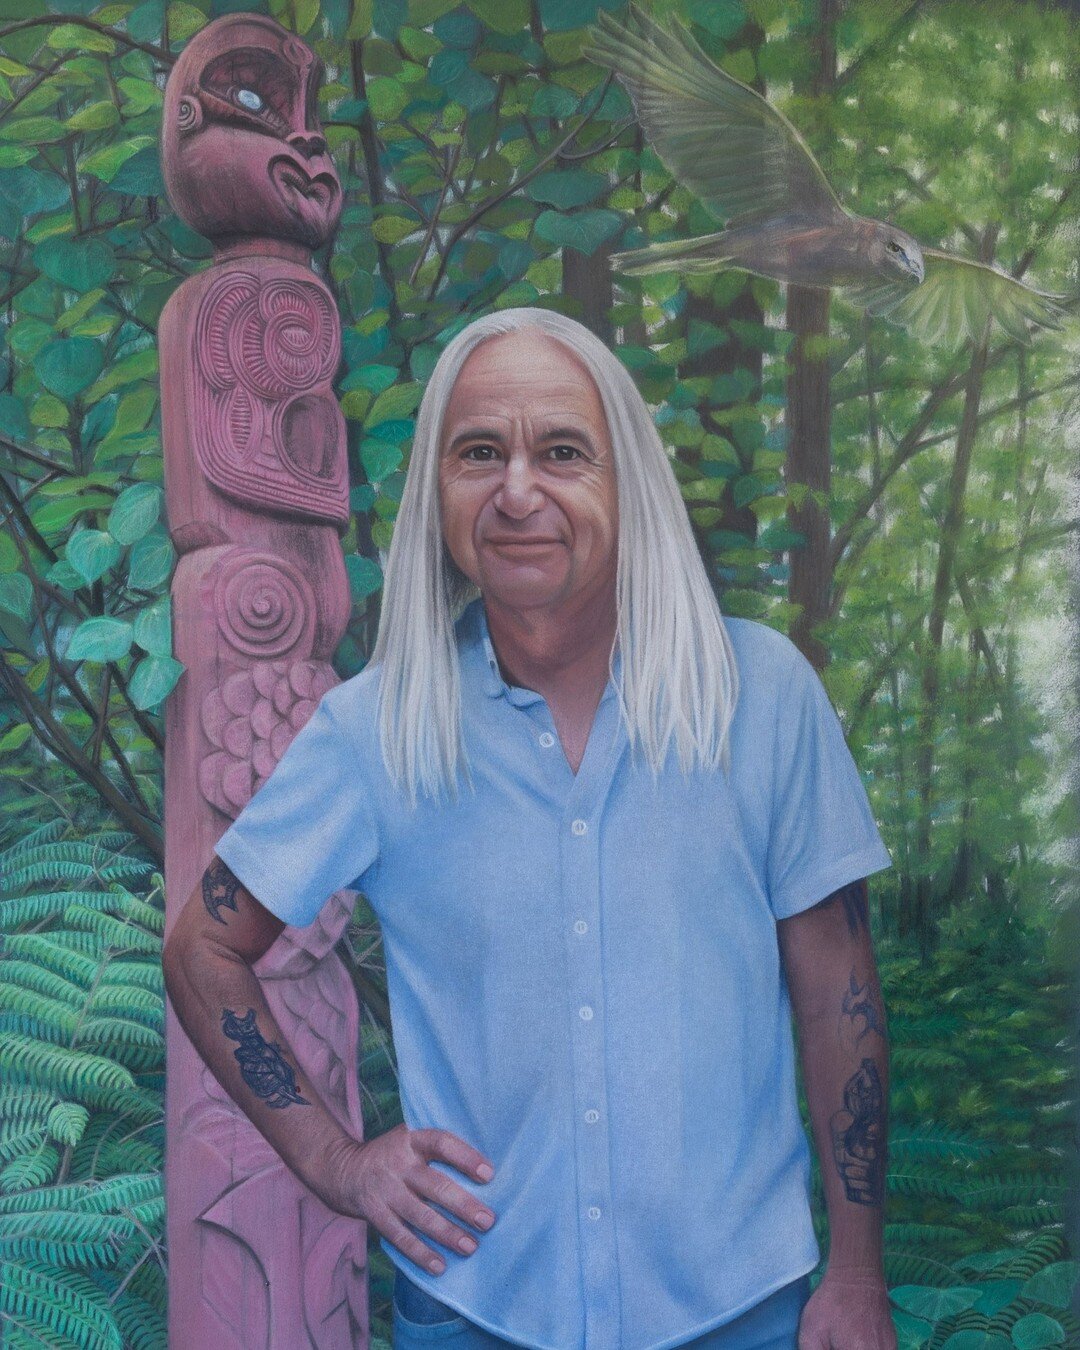 Highly Commended: Raewyn Helms-Davis 'Kāhu and the Carver' 2021.

&quot;Driving over the Tapu Hills to meet Peter at his 
home in the Kauaeranga Valley near Thames, I am 
accompanied by a kāhu, which flies alongside my car. The bird, I discover, is P